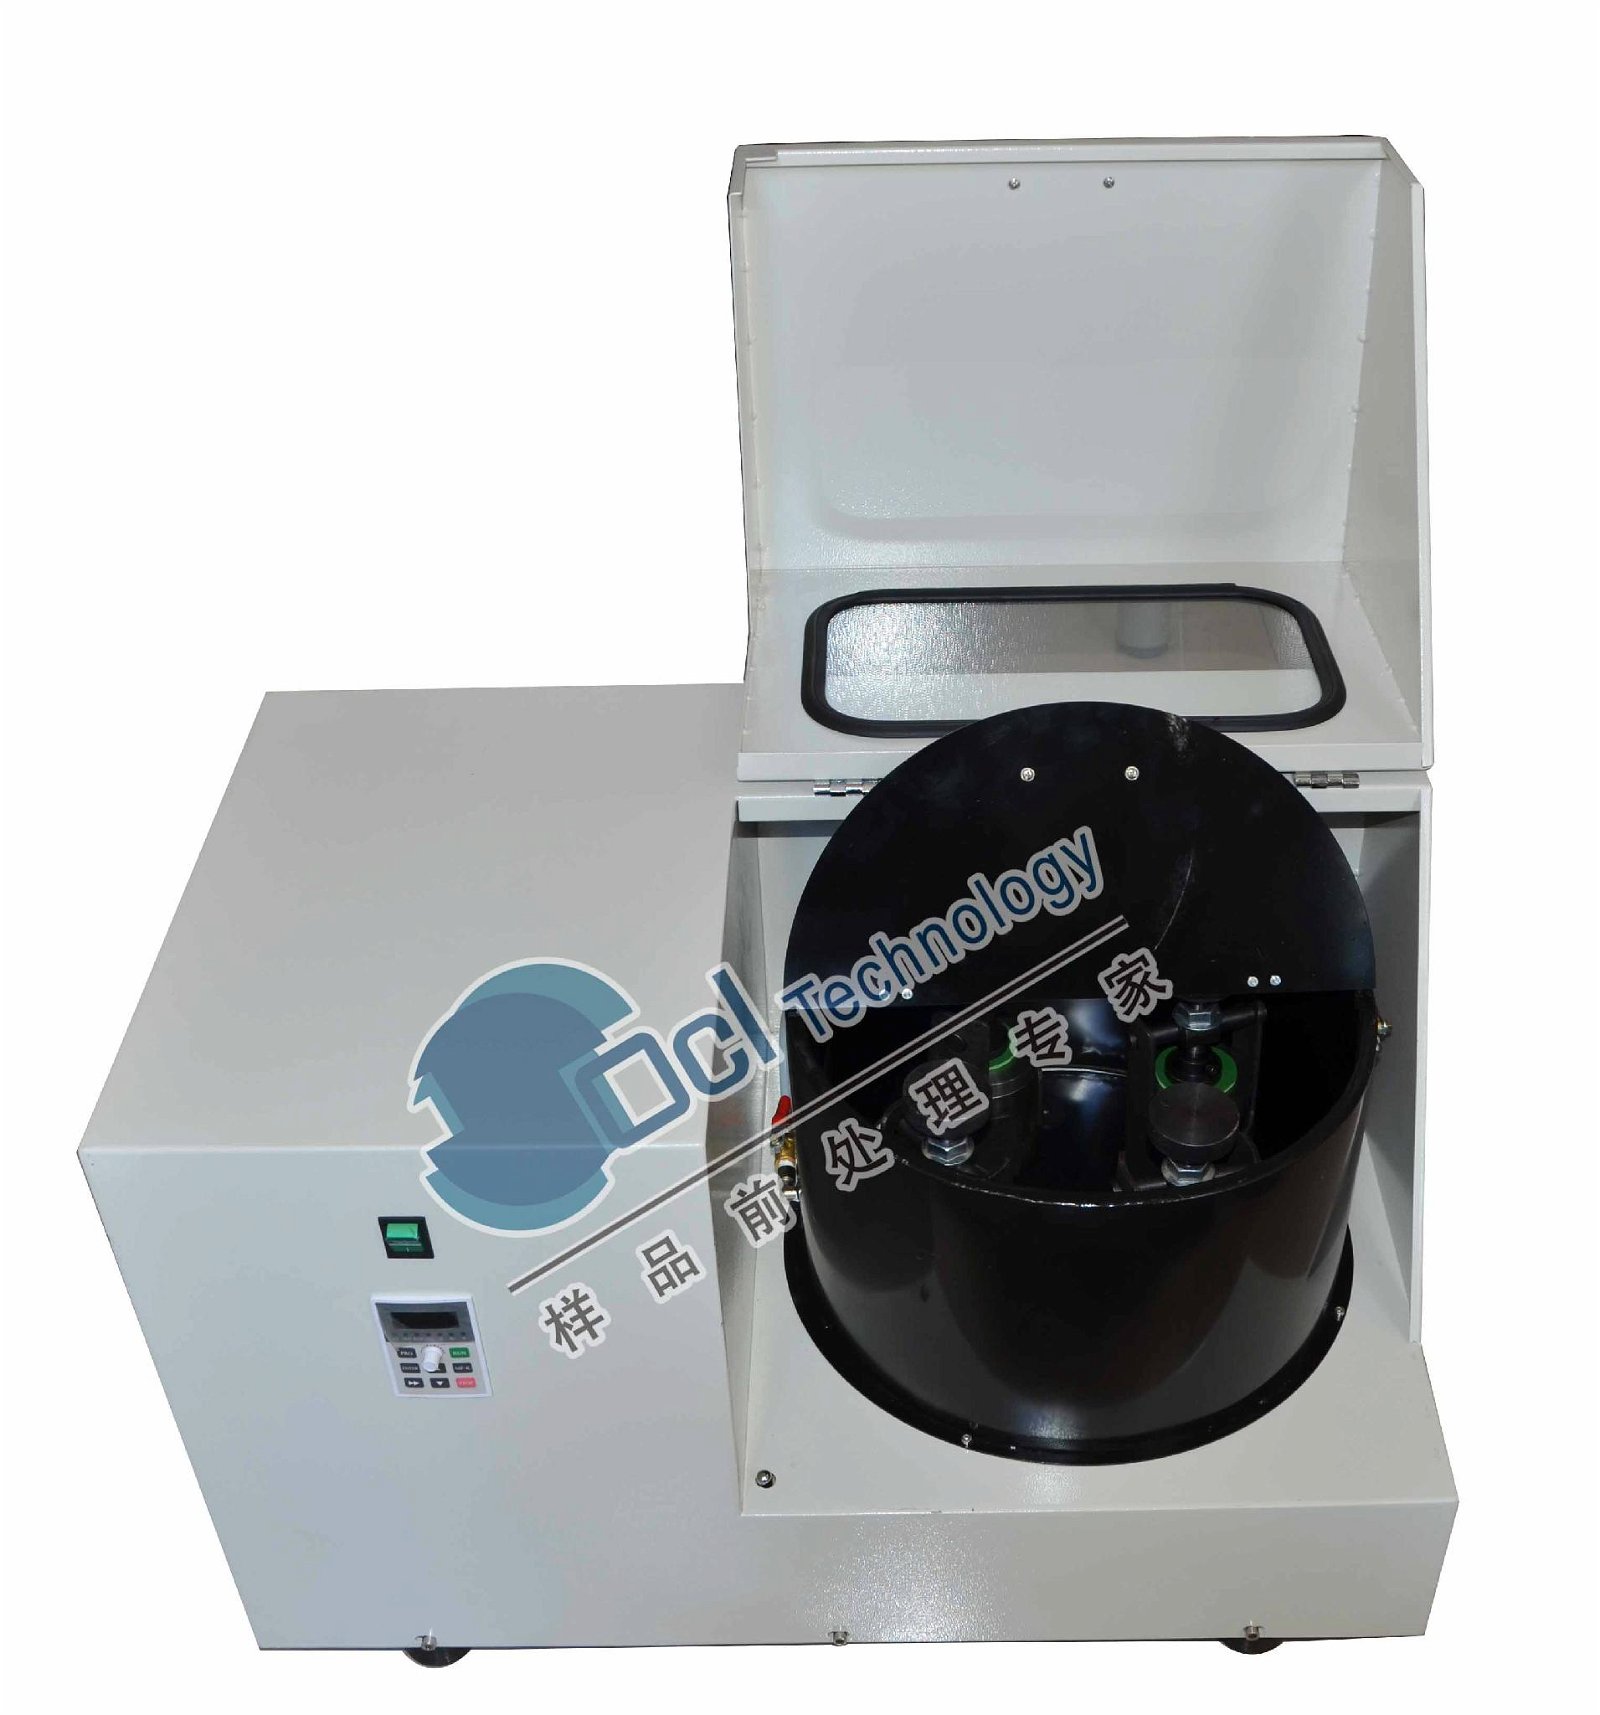 Laboratory Air Cooling Hypothermal Planetary Ball Mill